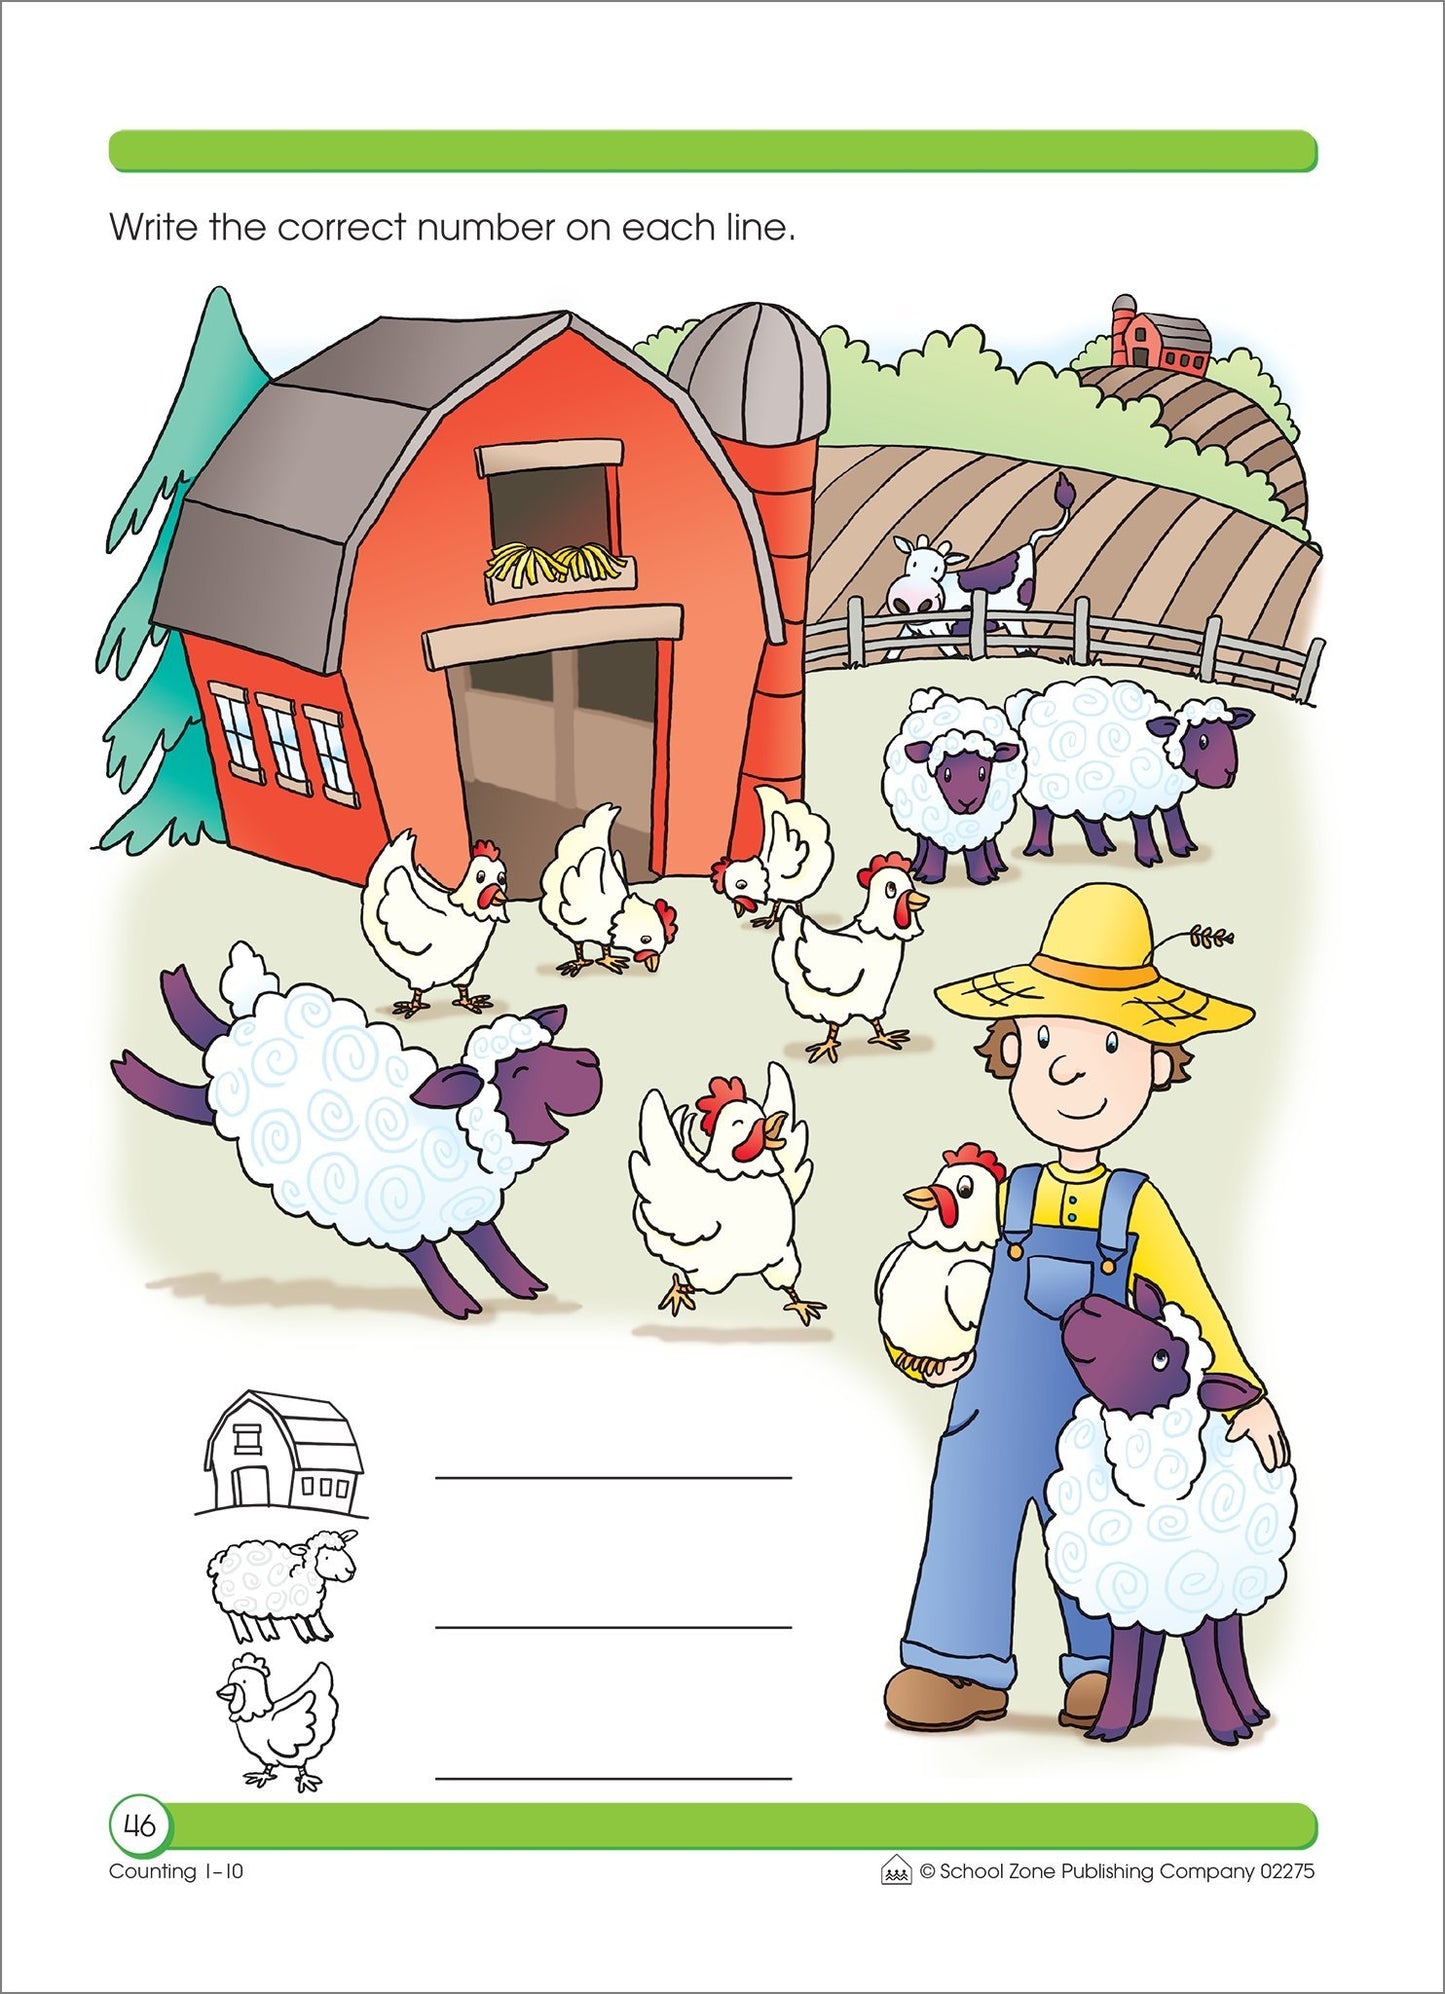 Counting 1-10 Workbook - Ages 3 to 5, Preschool to Kindergarten, Tracing, Identifying Numbers, Writing Numbers, Numerical Order, and More